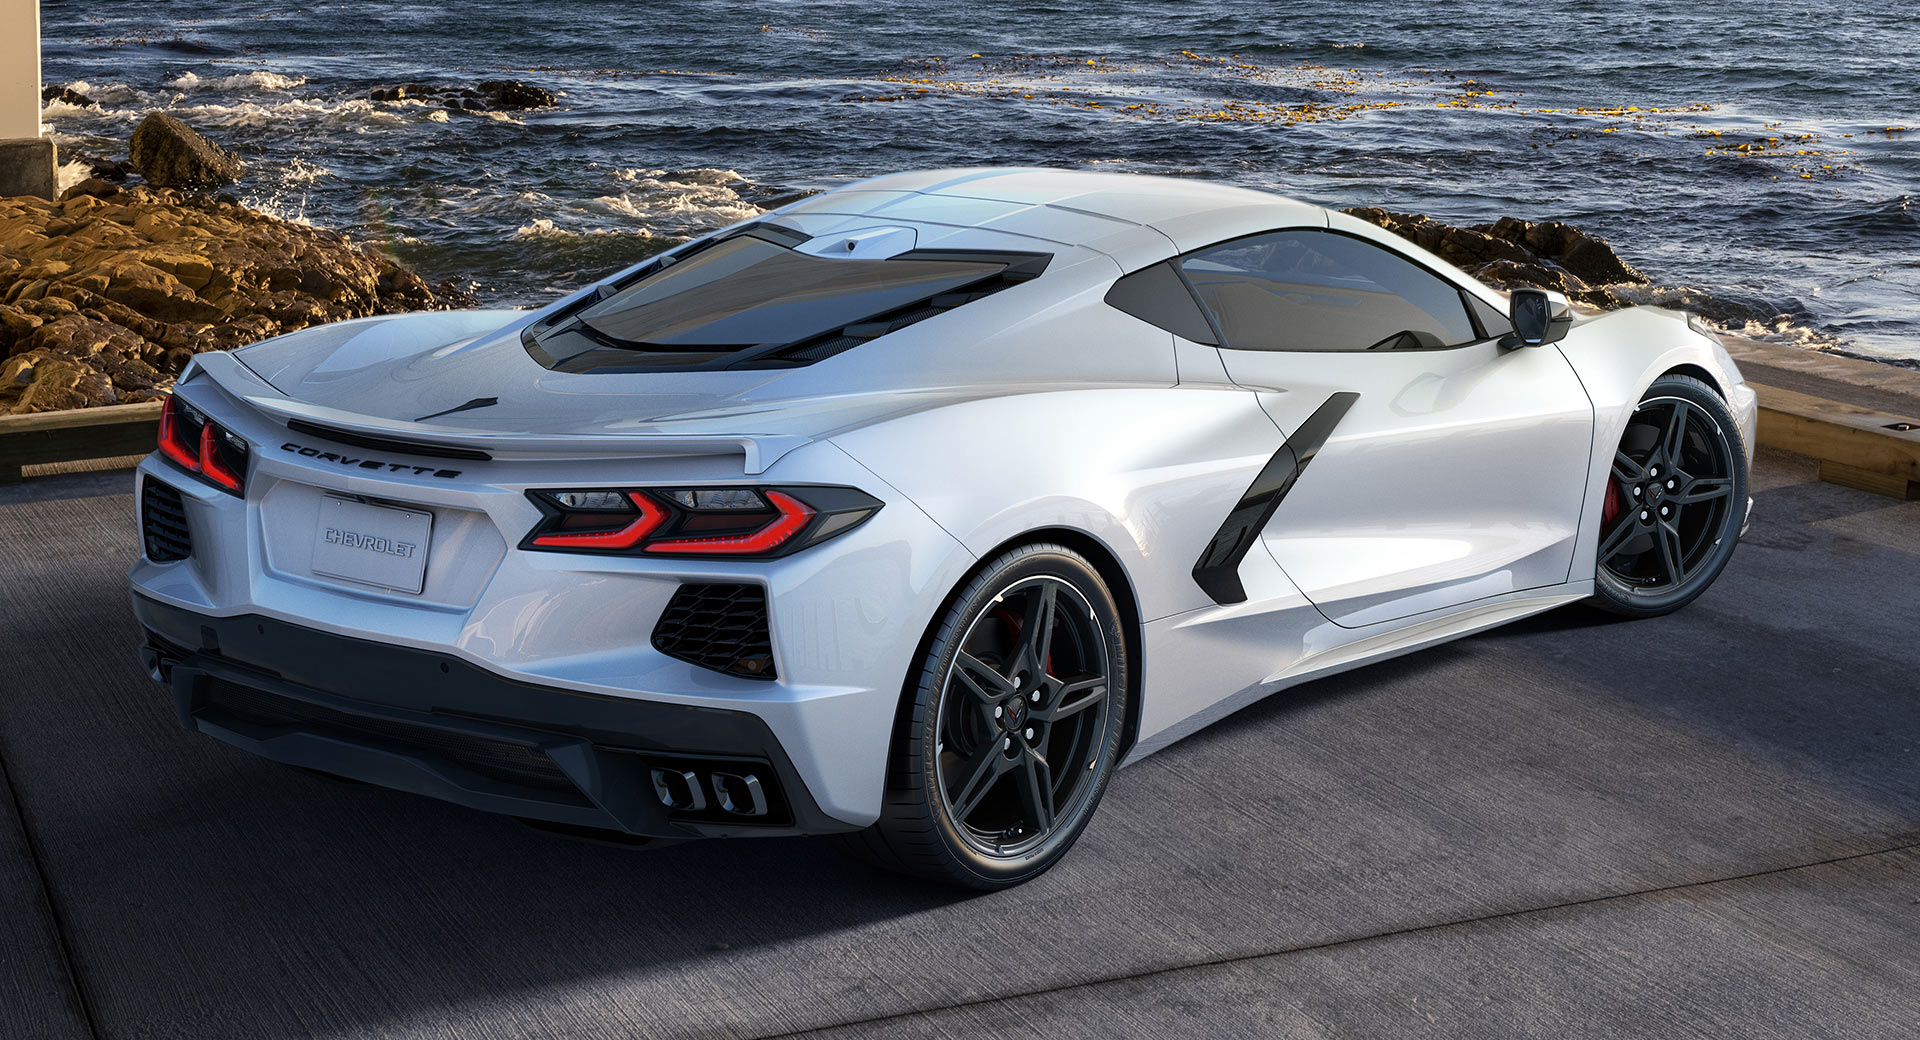 You Can Already Design Your Dream 2022 Corvette C8 On Chevy’s